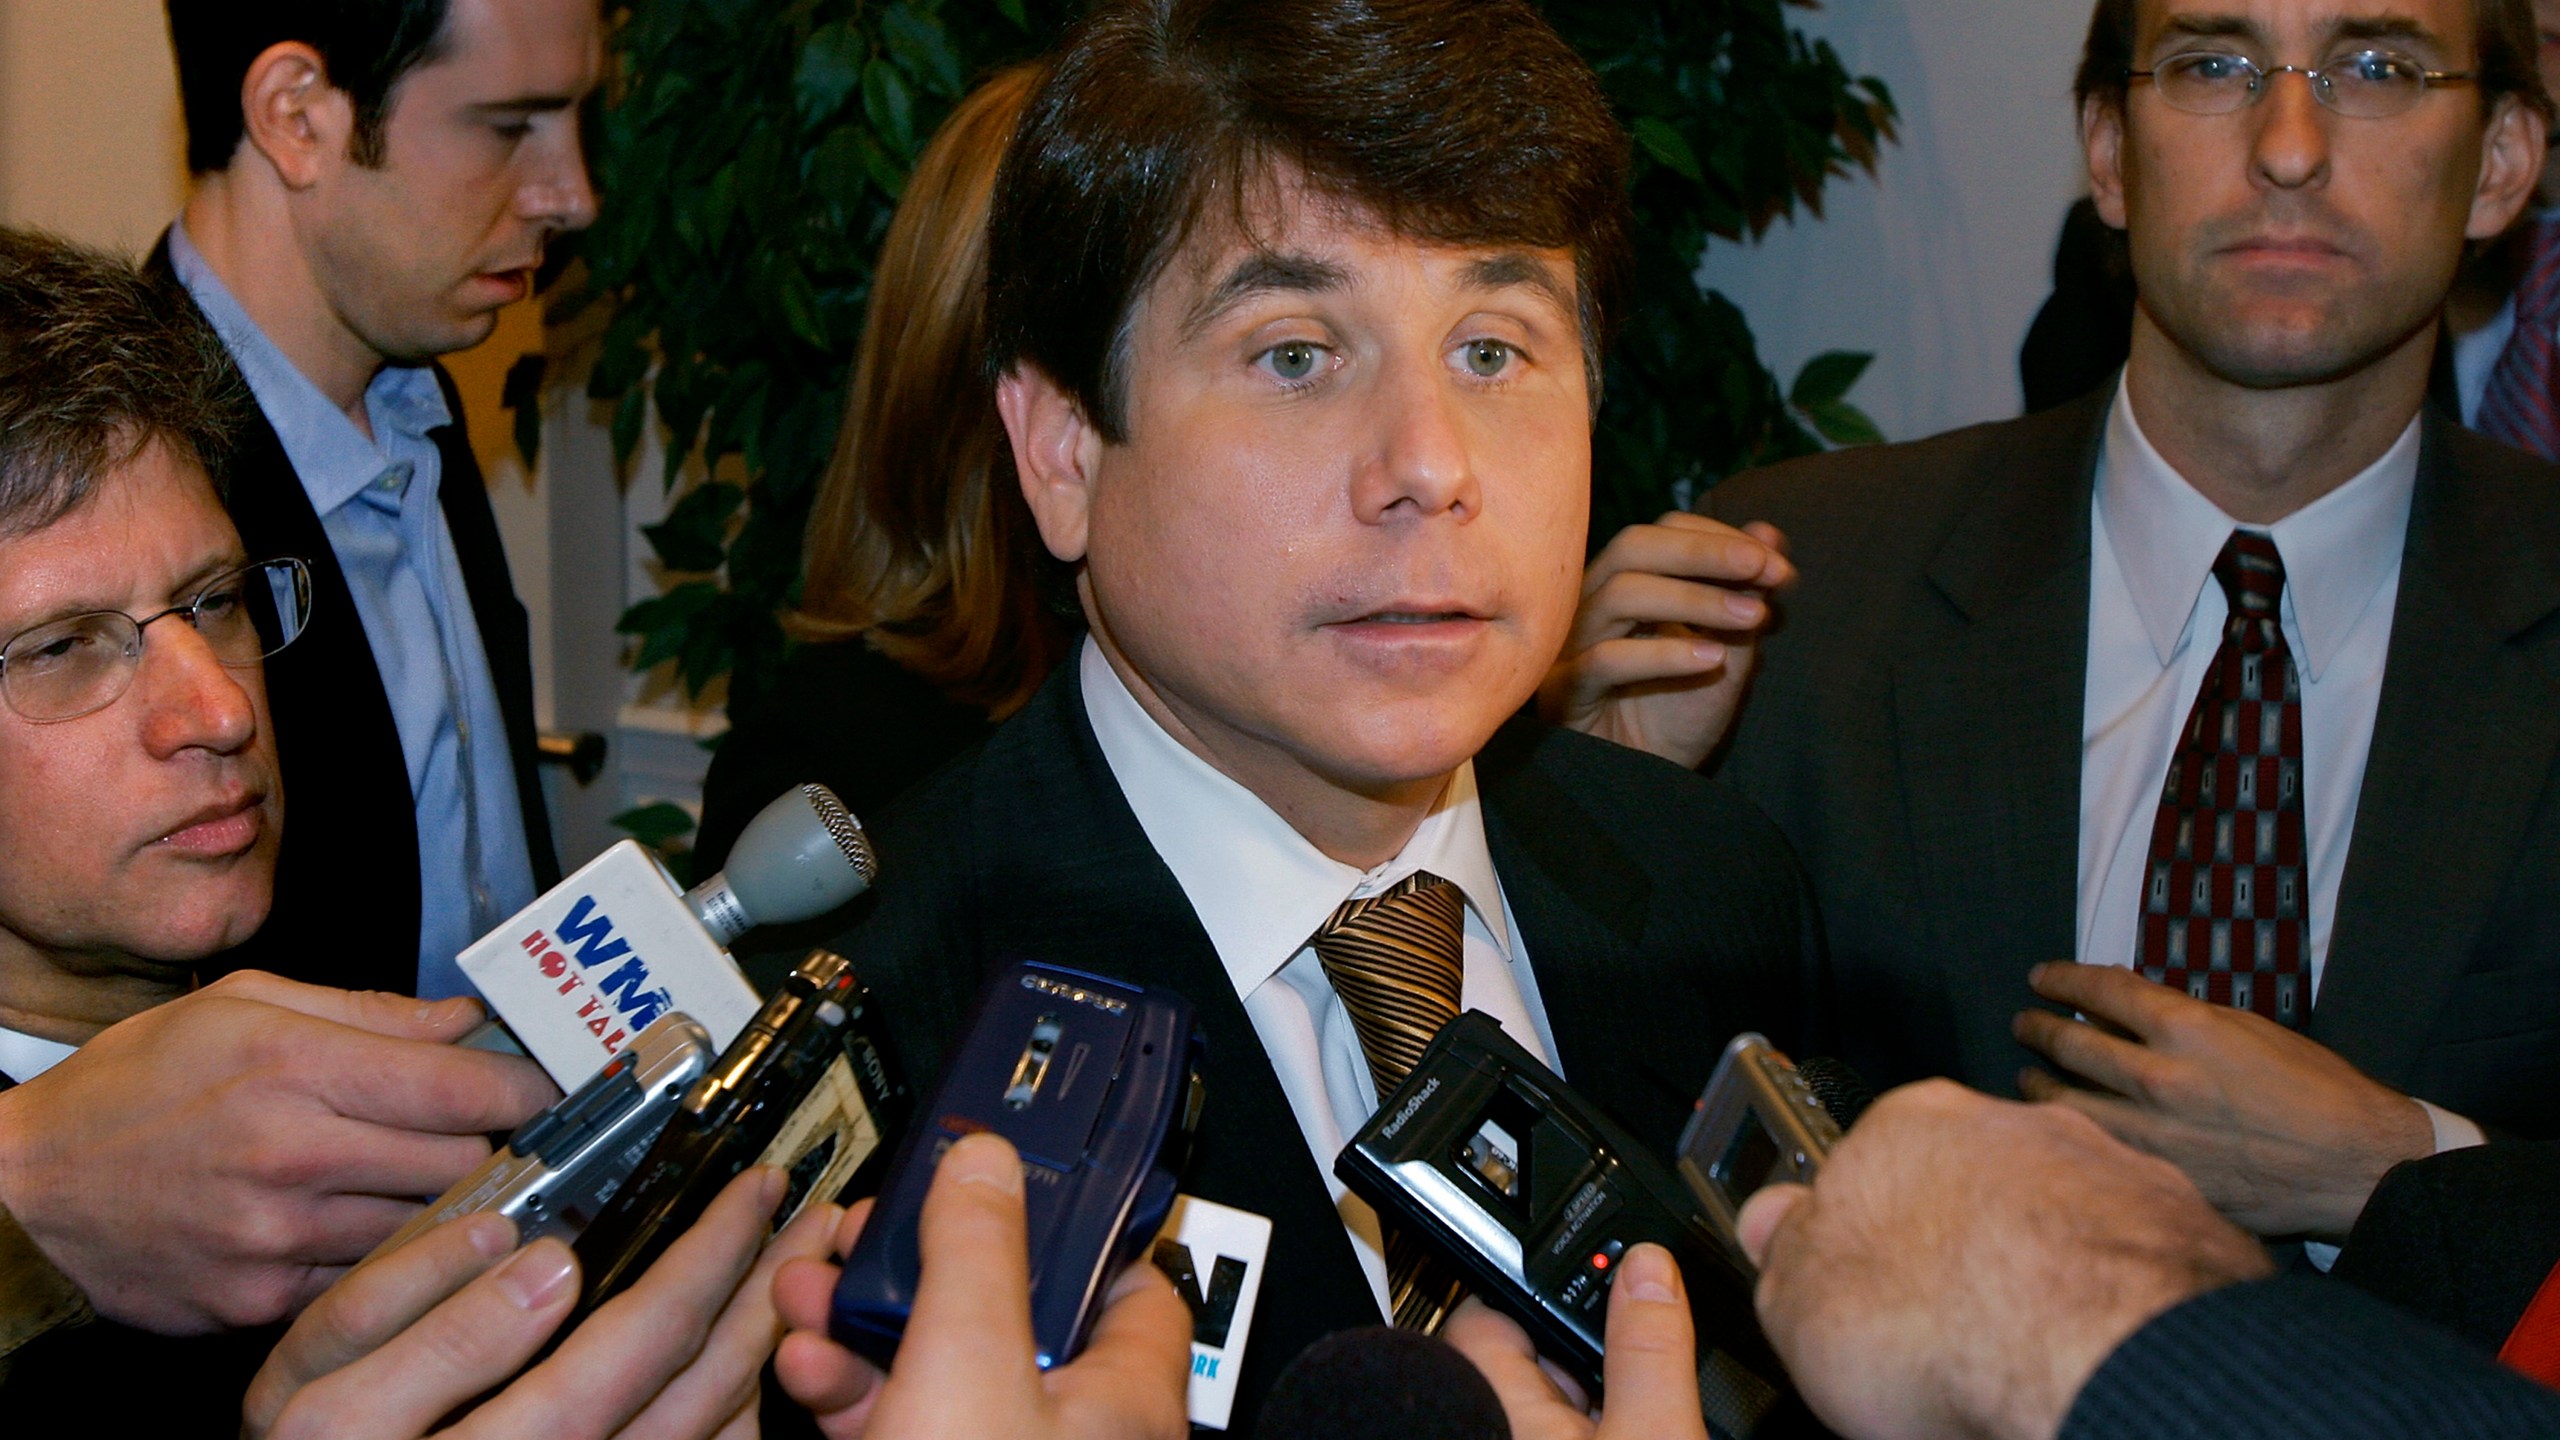 FILE - Illinois Gov. Rod Blagojevich speaks with news reporters Tuesday, Oct. 24, 2006, in Springfield, Ill. Blagojevich, the ex-governor and ex-con who often pulled great and sometimes puzzling quotations out of thin air to emphasize his positions, found himself at the other end Thursday, March 212, 2024, when a federal judge dismissed his lawsuit attempting to return to public life by quoting Dr. Seuss: “Just go.” (AP Photo/Seth Perlman, File)